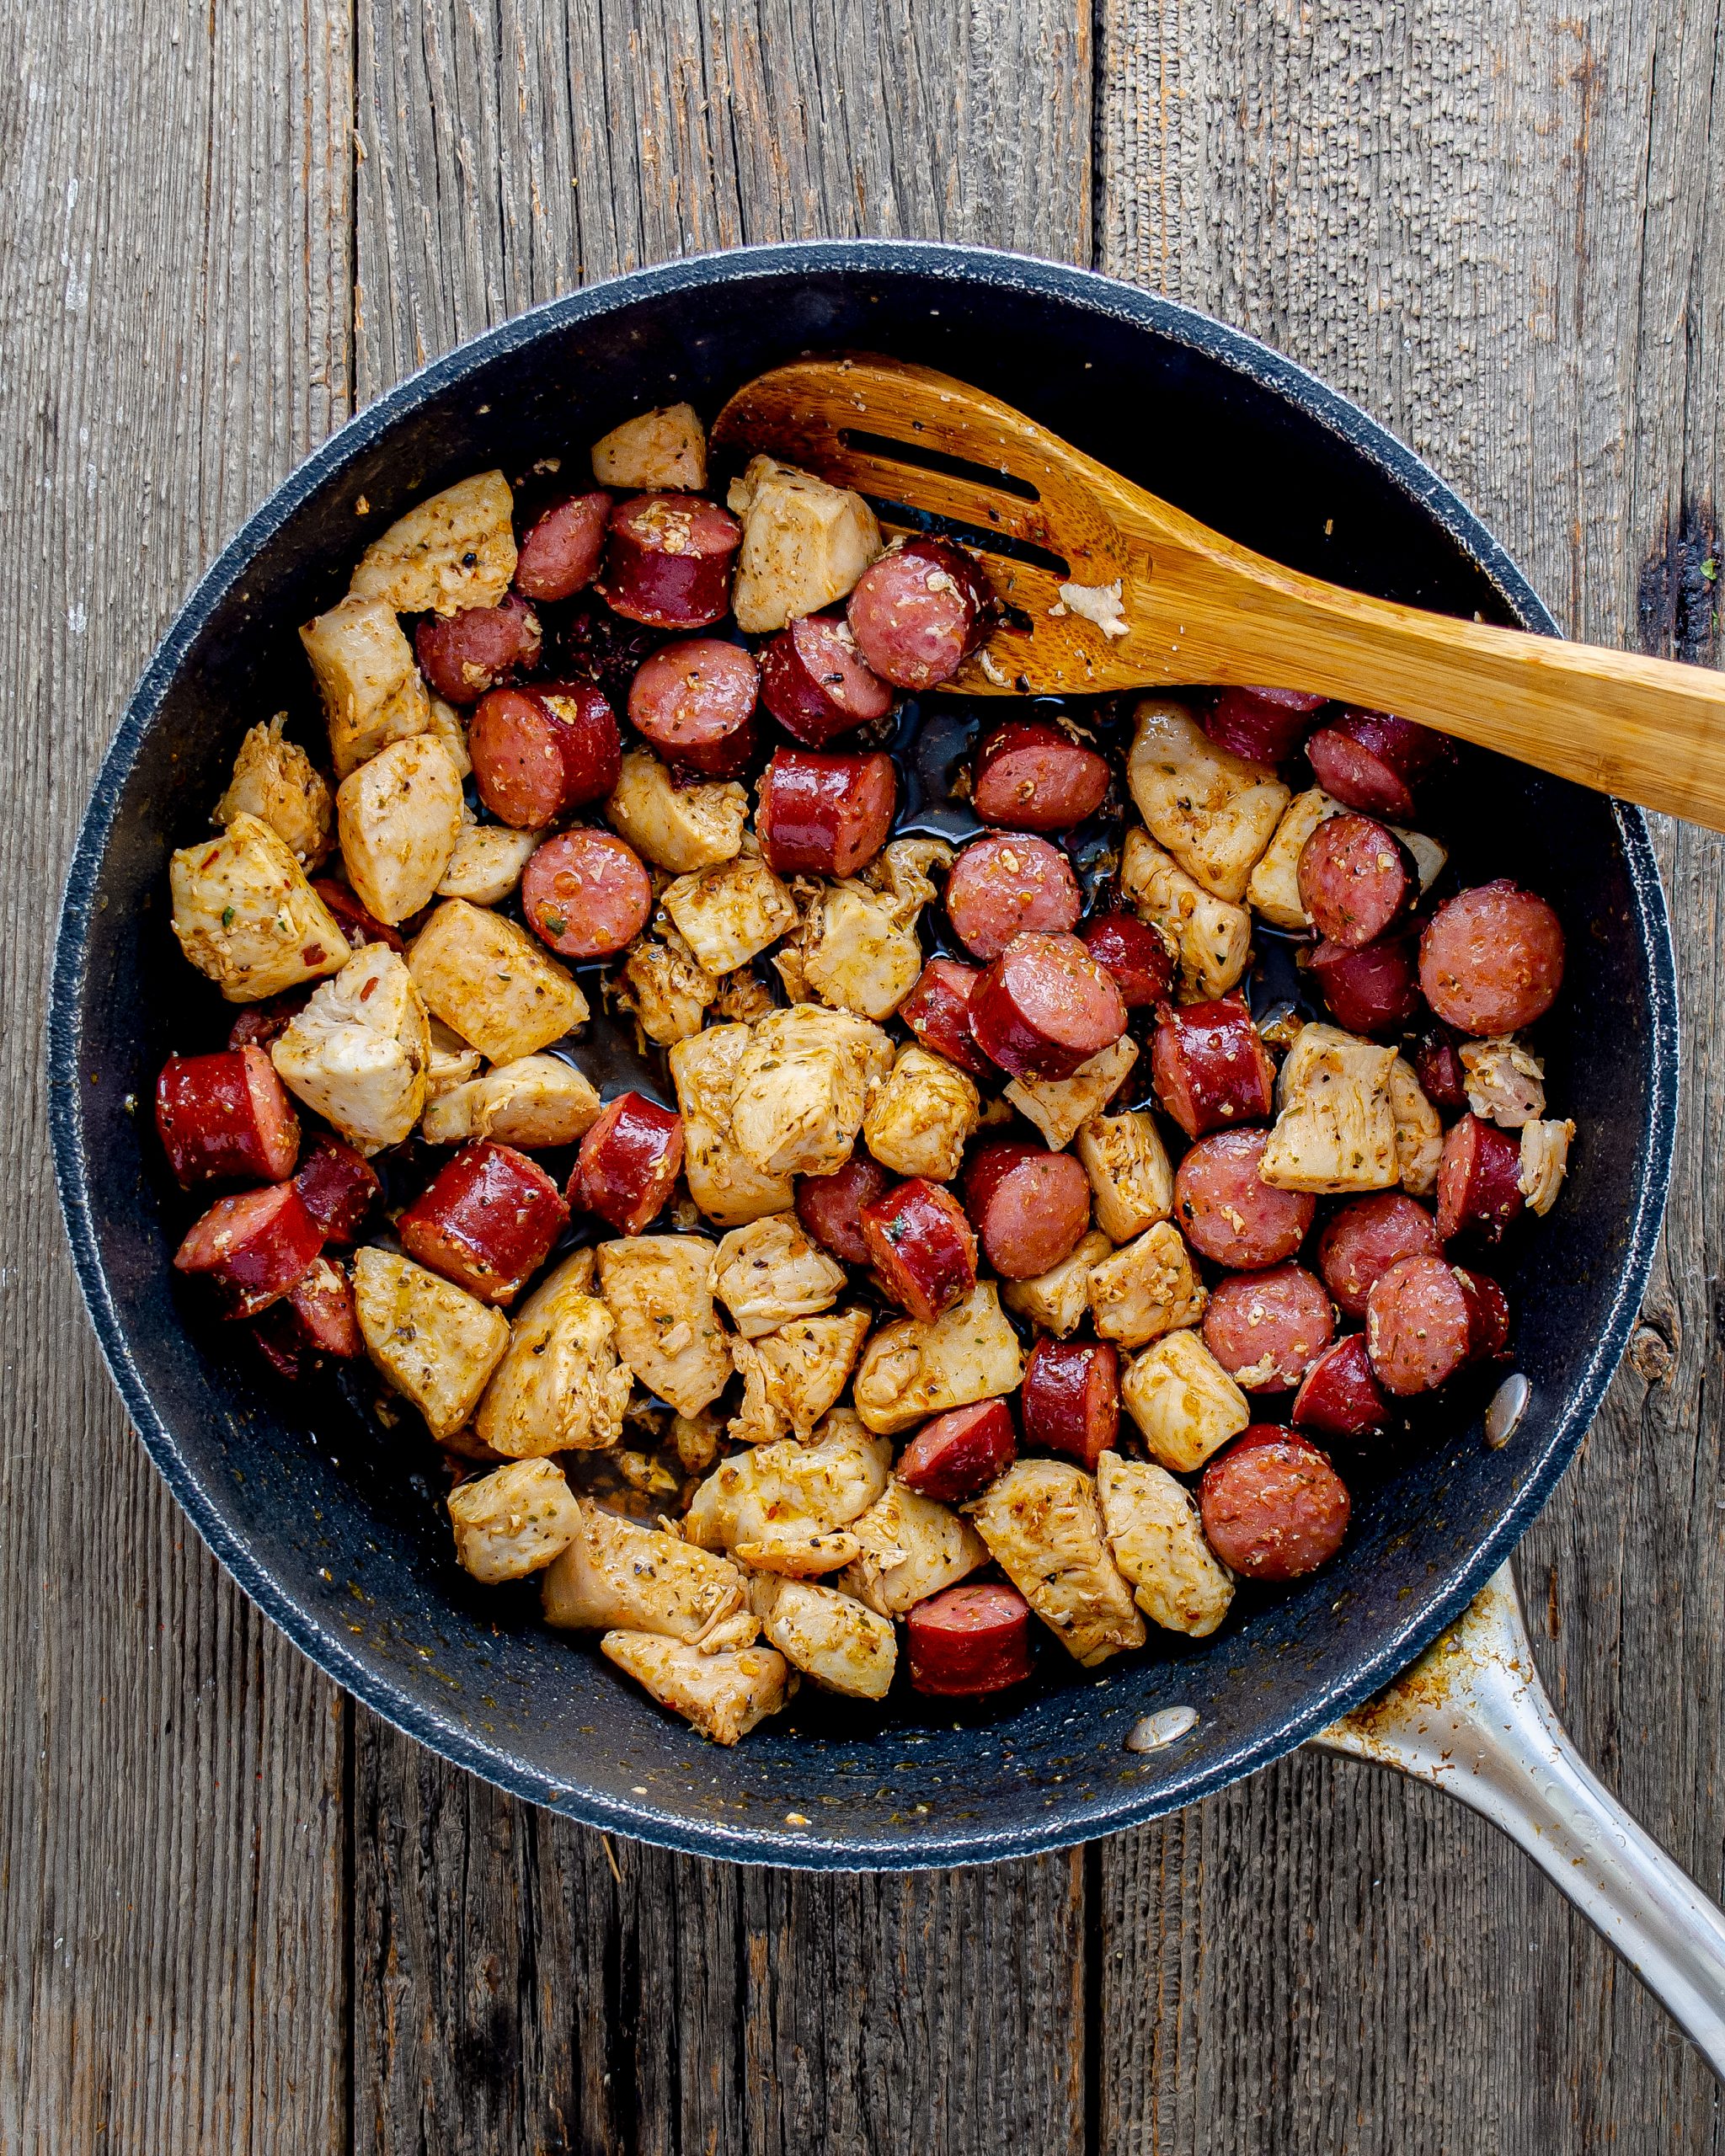 Season the chicken with the creole seasoning, and add to the heated skillet with the sausage. Saute until the chicken and sausage are cooked through.